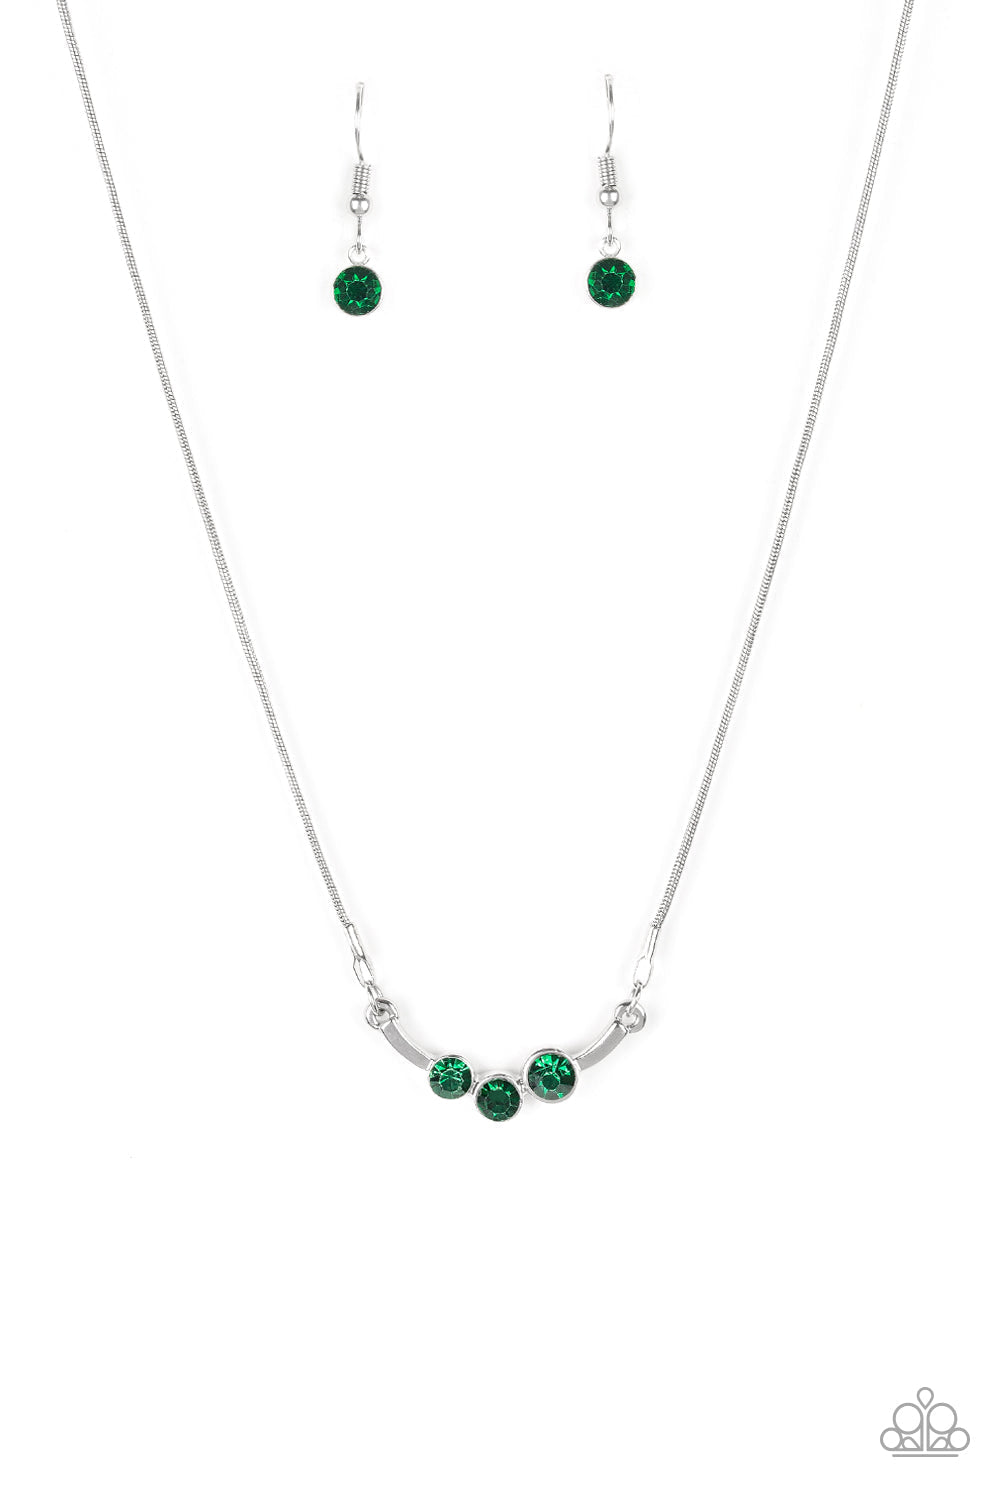 Sparkling Stargazer - Green and Silver Necklace - Paparazzi Accessories - A trio of glittery green rhinestones are encrusted along a bowing silver bar, creating a stellar pendant below the collar. Features an adjustable clasp closure.